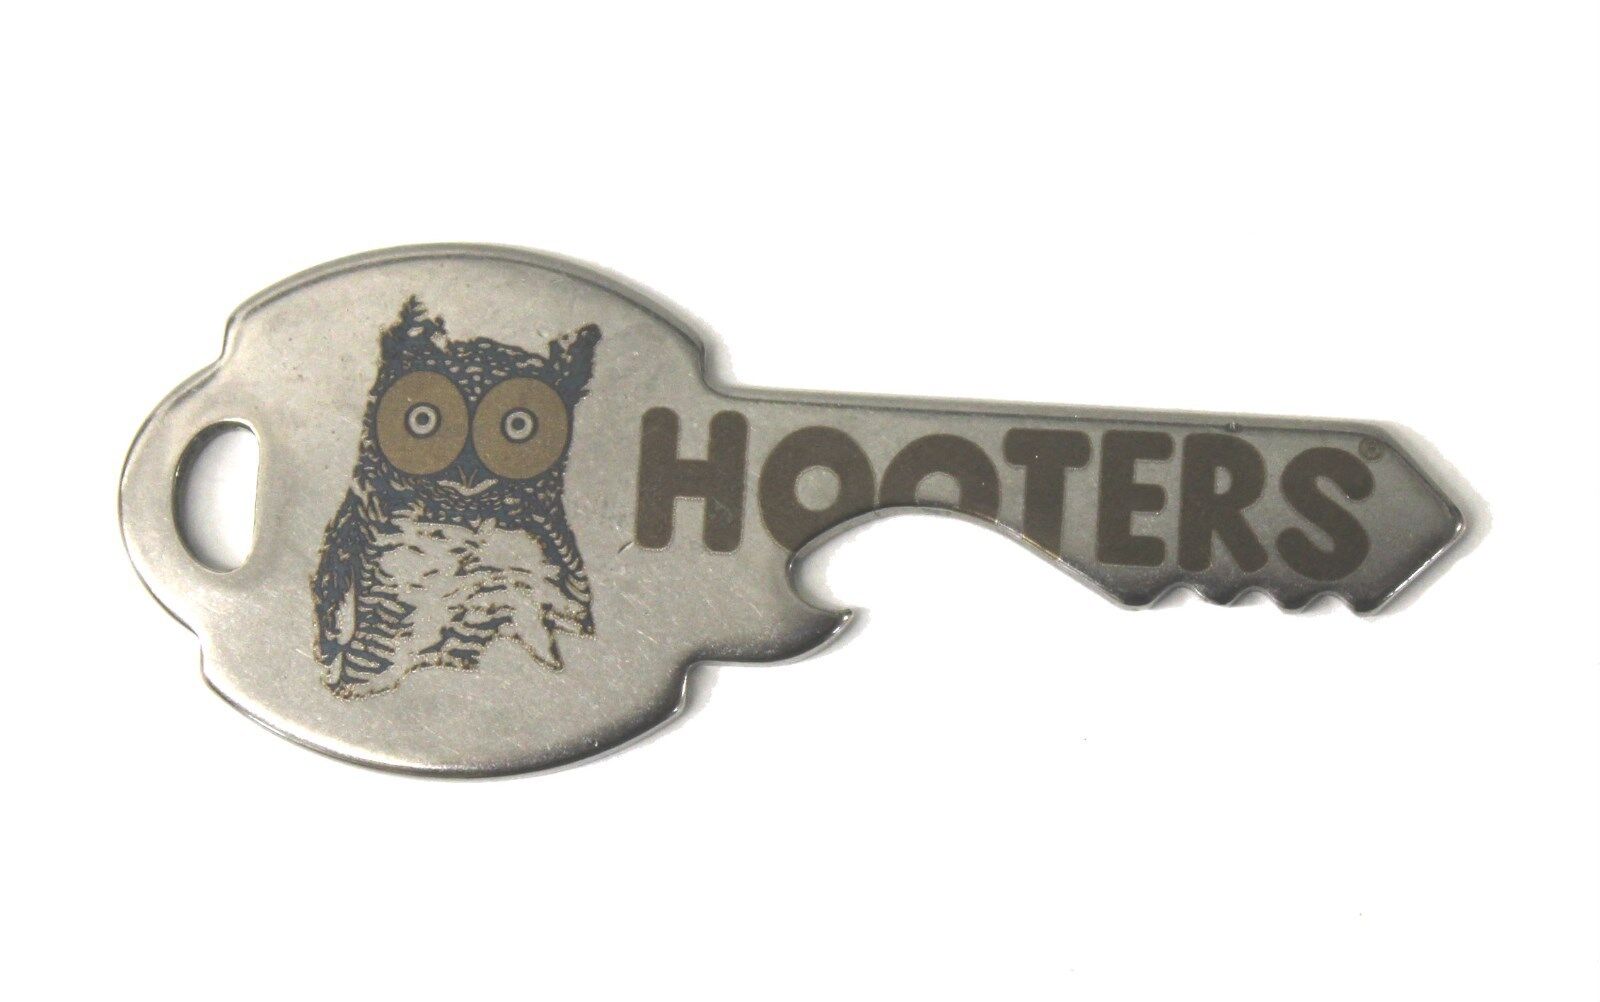 Hooters Collectible Stainless Steel Brewzkey Car Key Chain Owl Bottle Opener